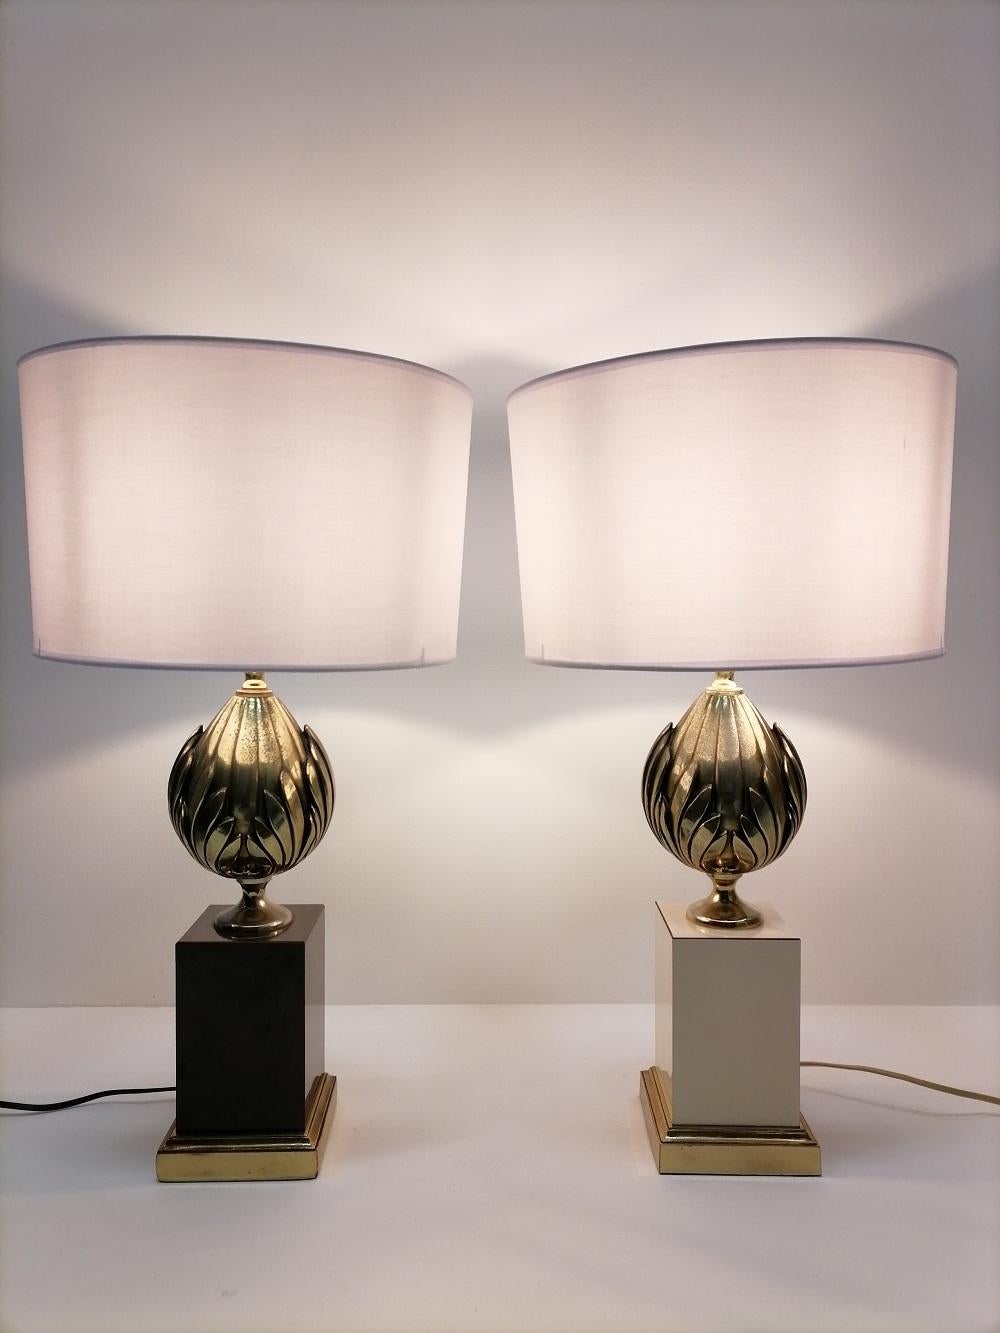 Metal 1970 French Midcentury Pair of Table Lamps in Maison Charles Style For Sale